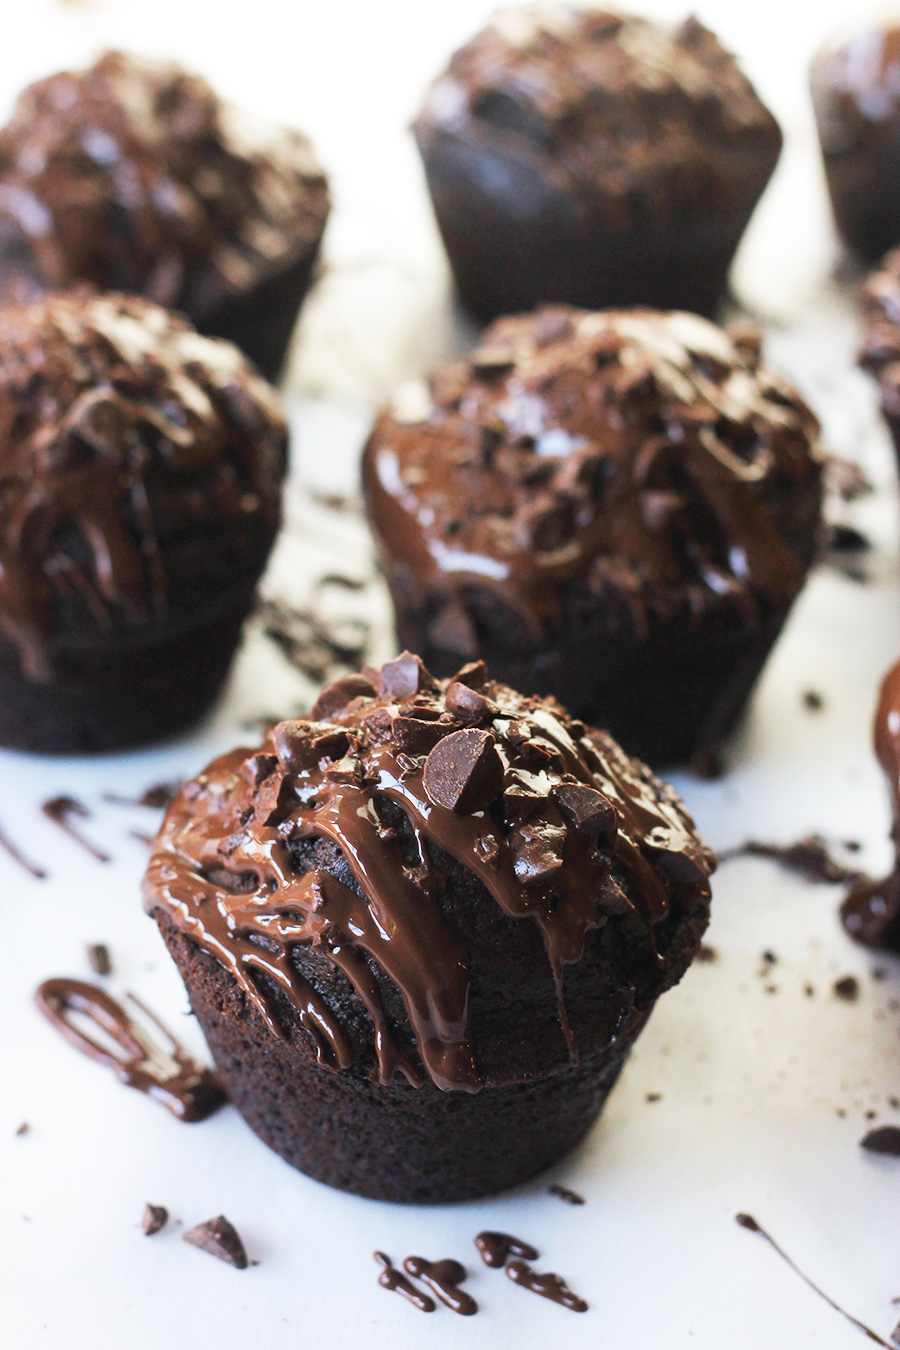 Close-up of Chocolate-On-Chocolate vegan cupcakes drizzled with melted chocolate and sprinkled with chocolate pieces.